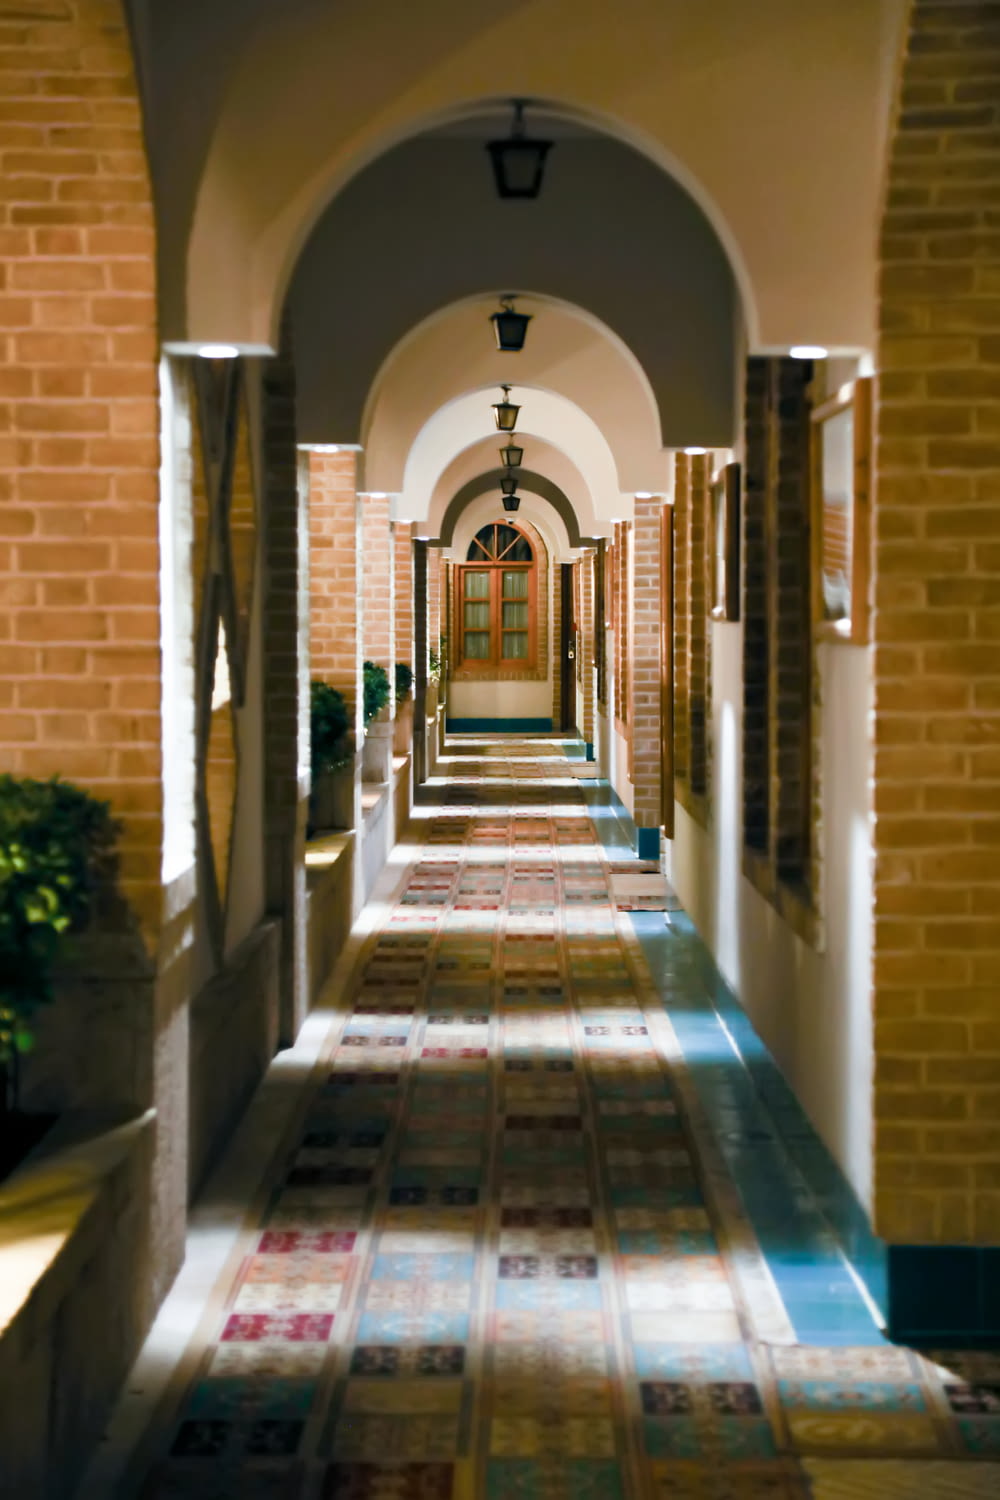 a long hallway with tiled floors and arches